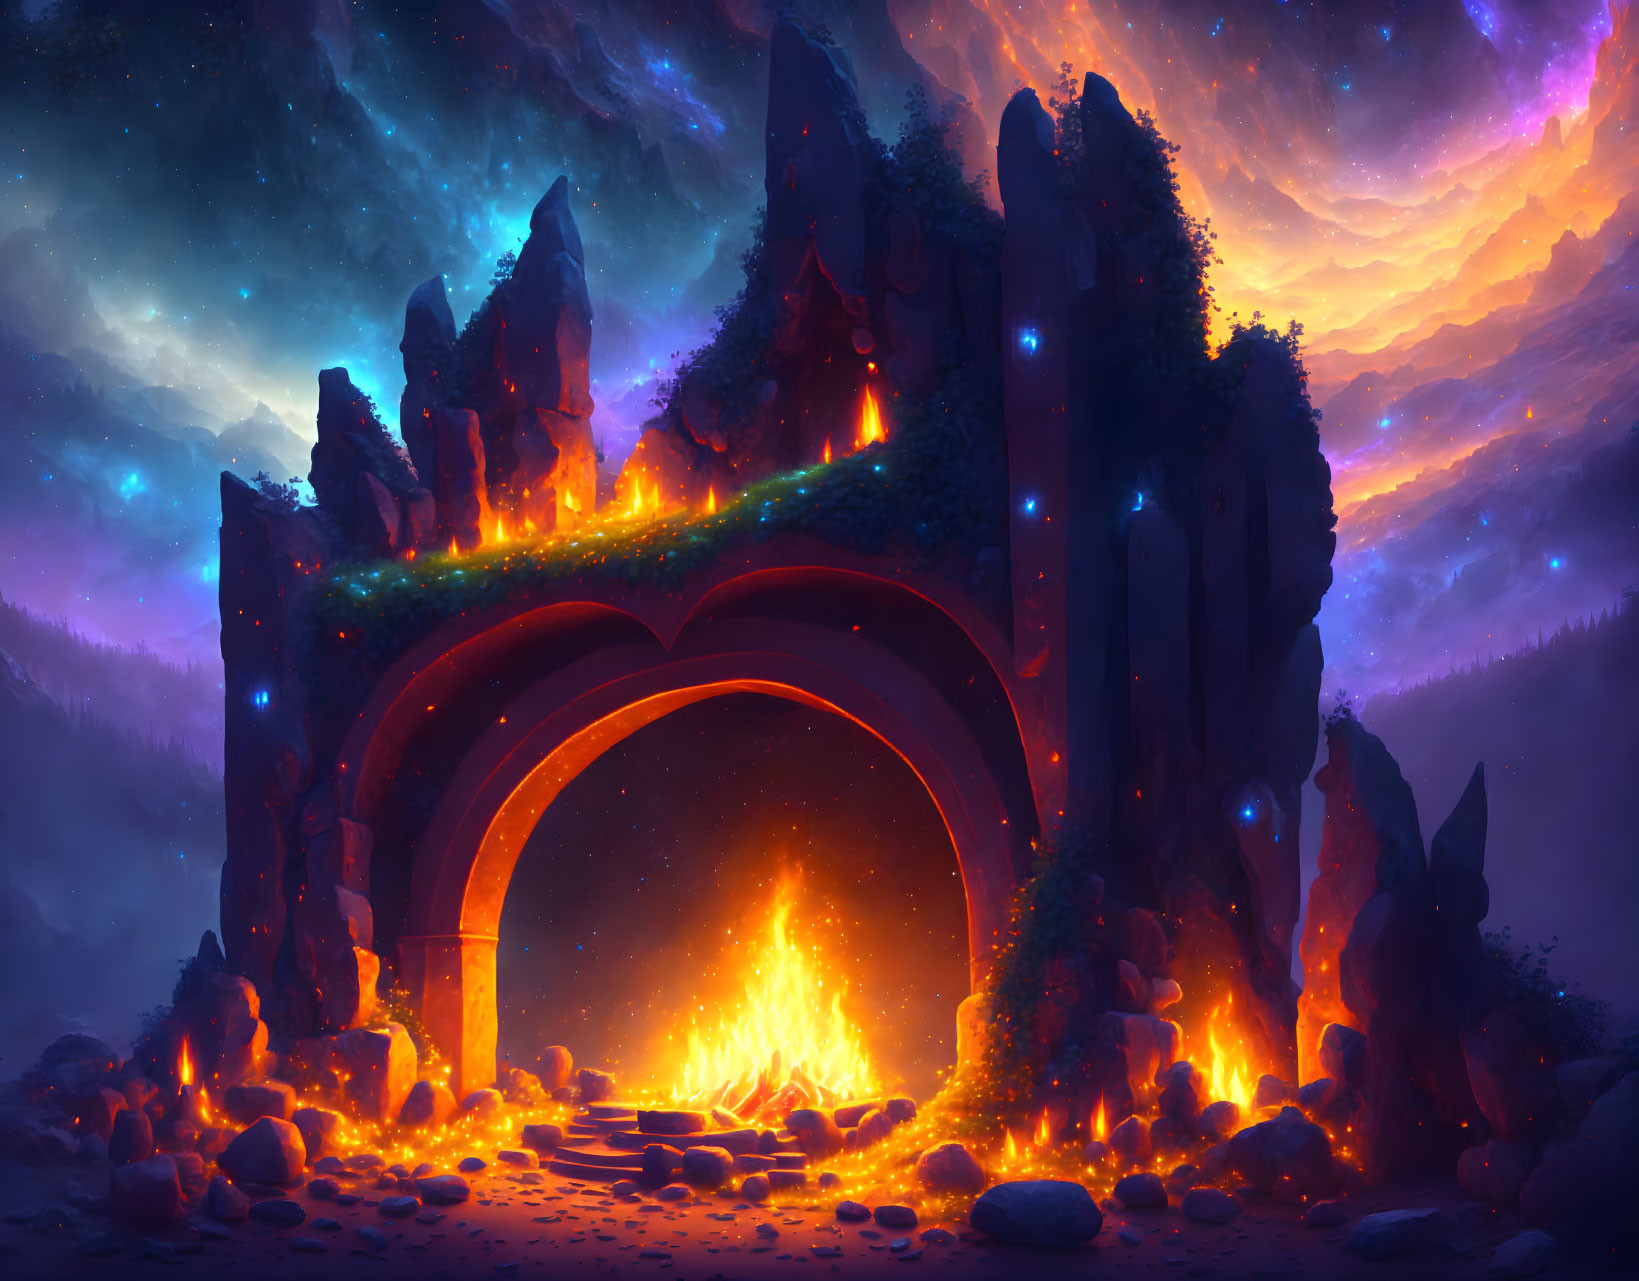 Fantasy landscape with bonfire, starry sky, rocky arch, and glowing crystals